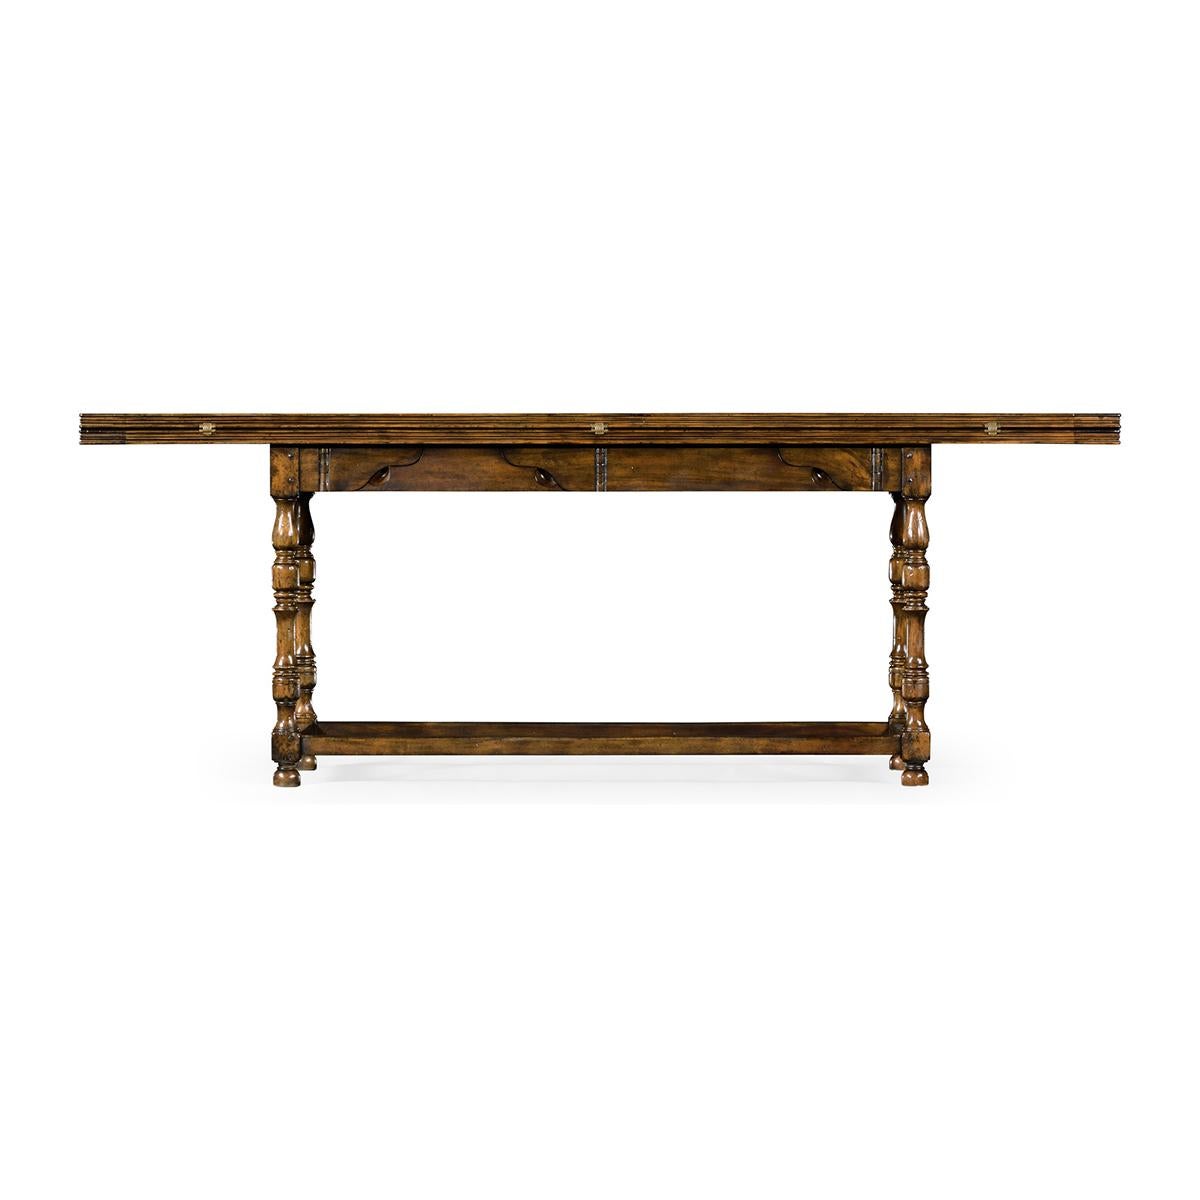 Country Hunt dining table with old-world charm and modern functionality. With a planked walnut top composed of three hinged panels that allow for different configurations and uses. A long console table or open to a classic kitchen or dining table.